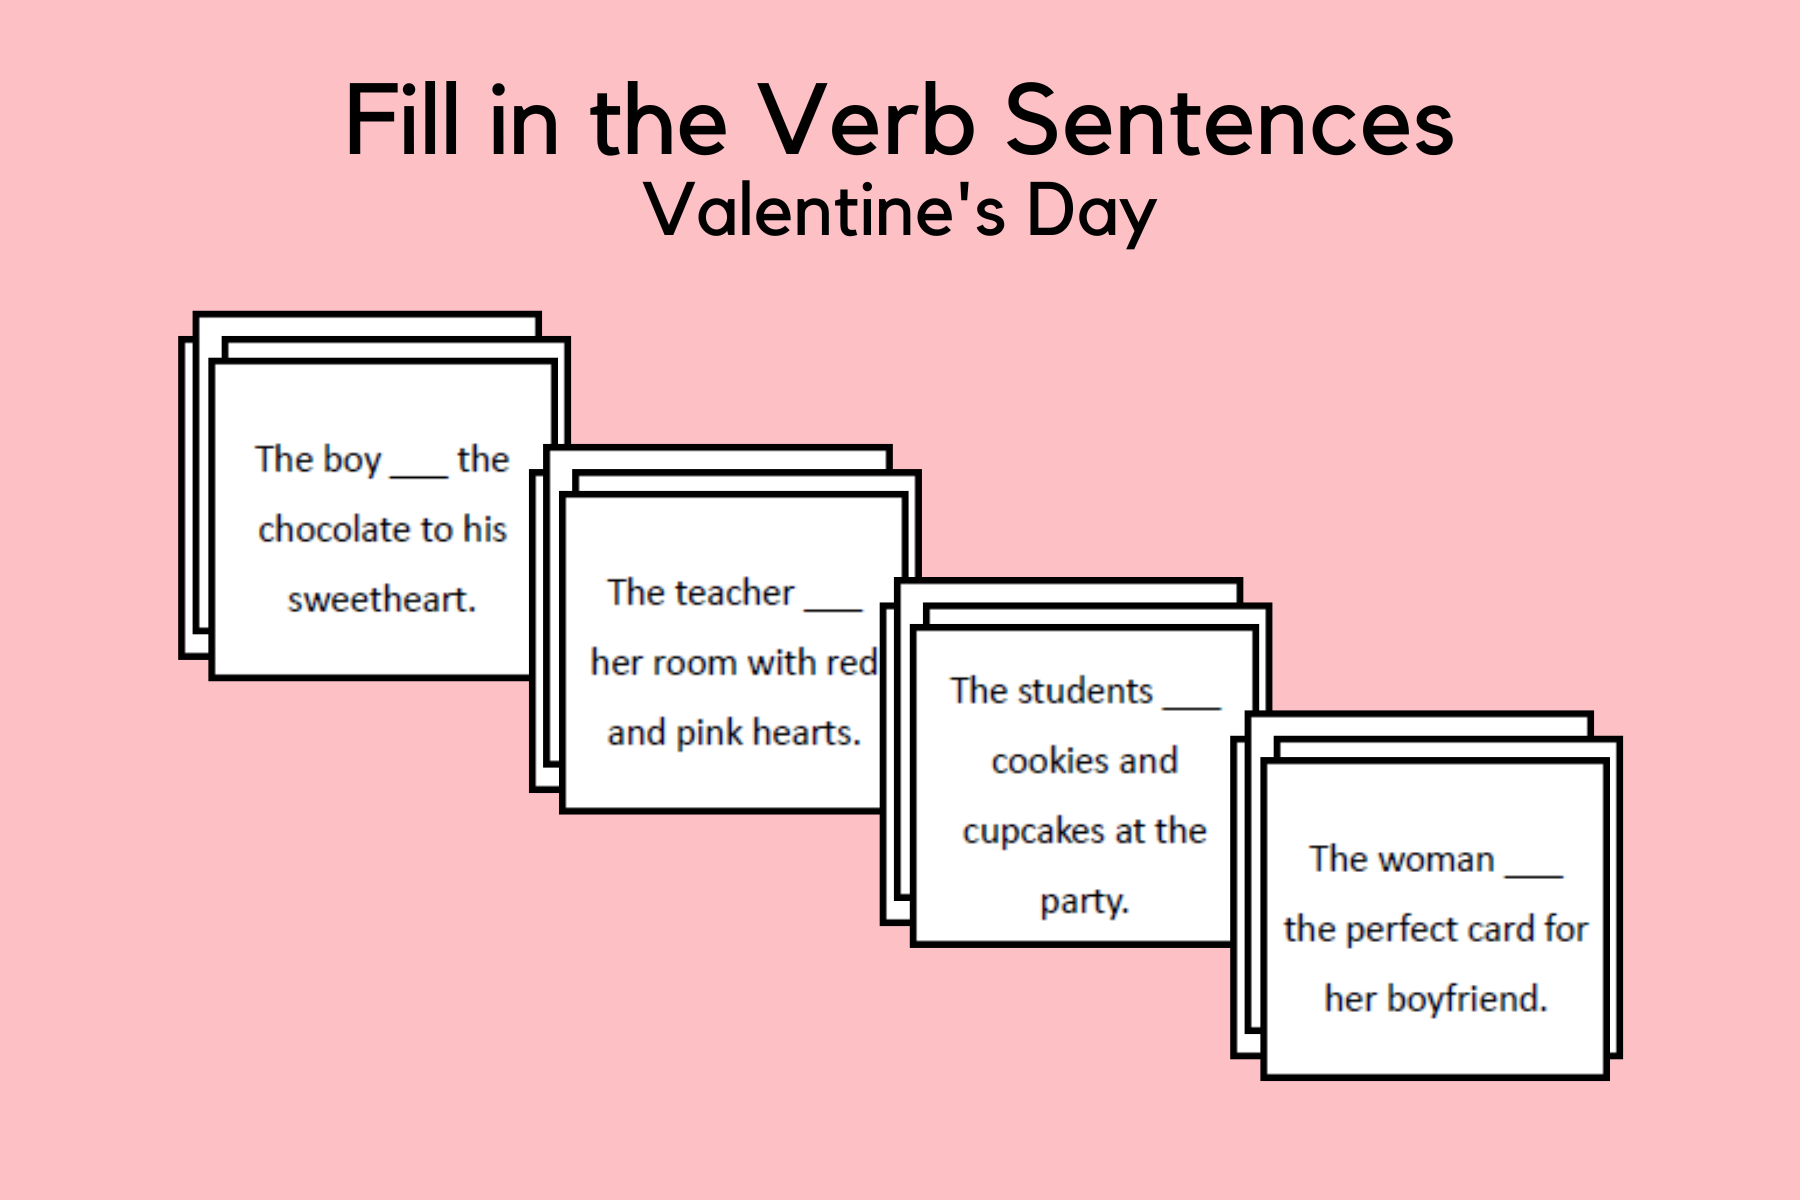 Fill In The Verb Sentences For Valentine’s Day